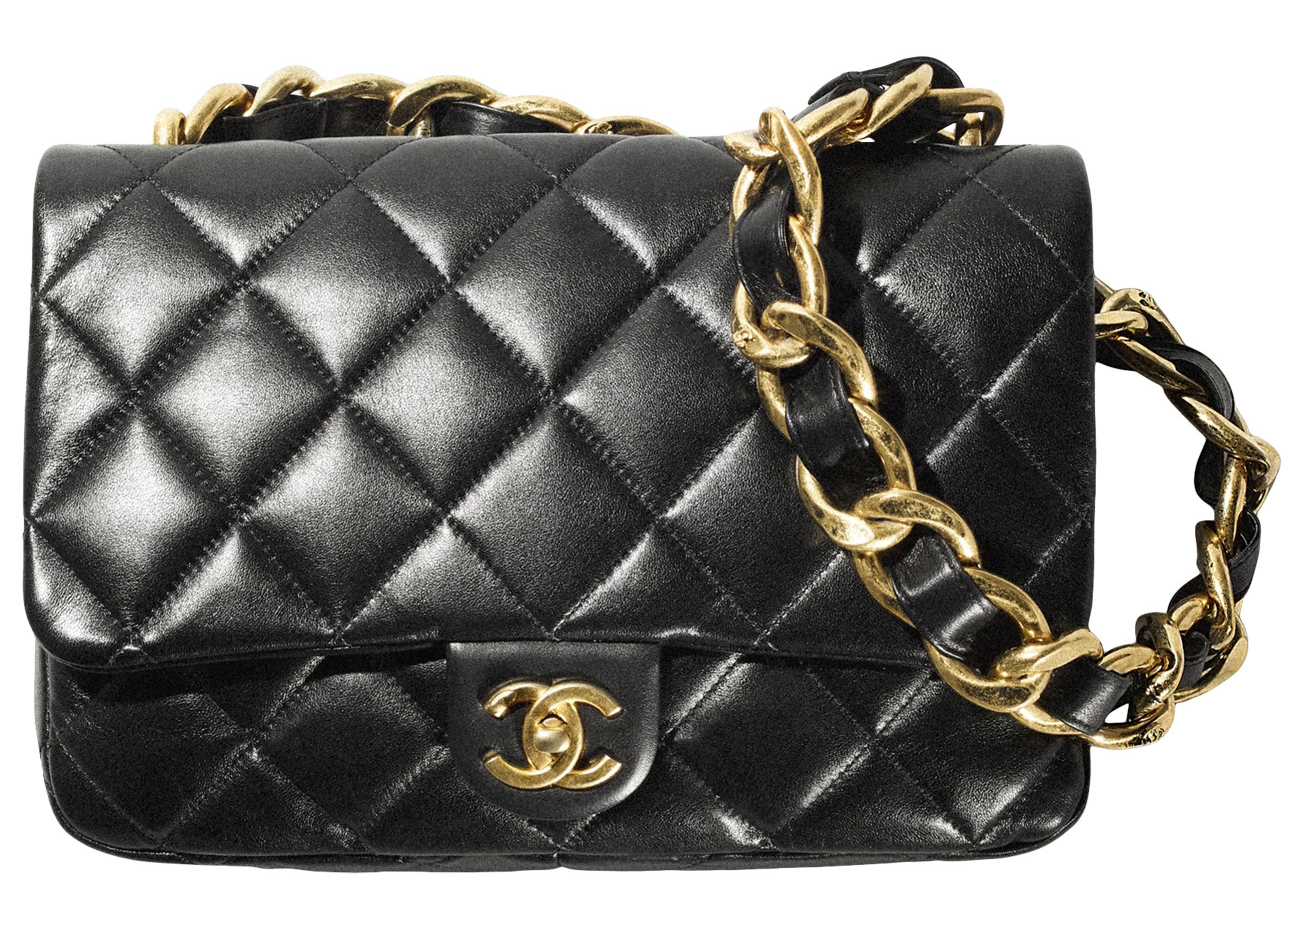 CHANEL Timeless Double flap double chain Black leather Lambskin  LuLuLeBag